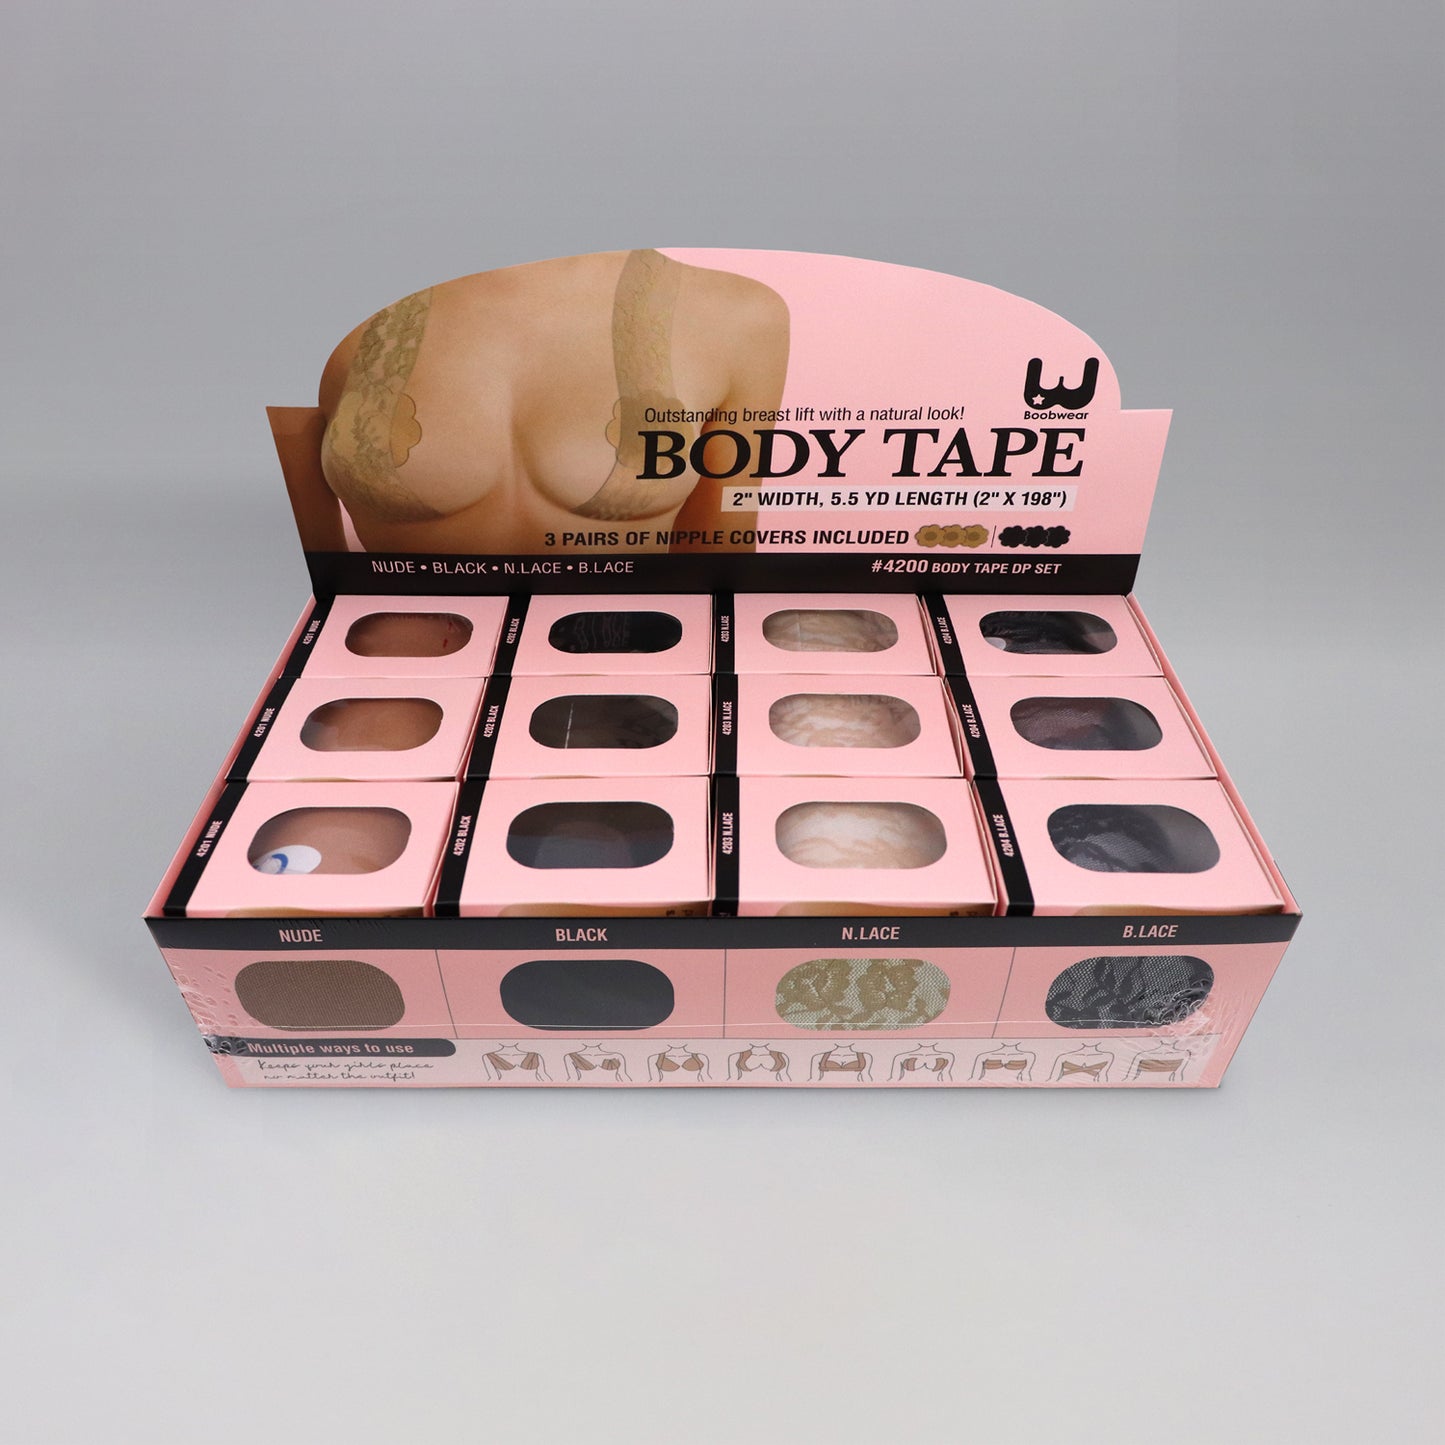 BODY TAPE DISPLAY SET by WANNABE